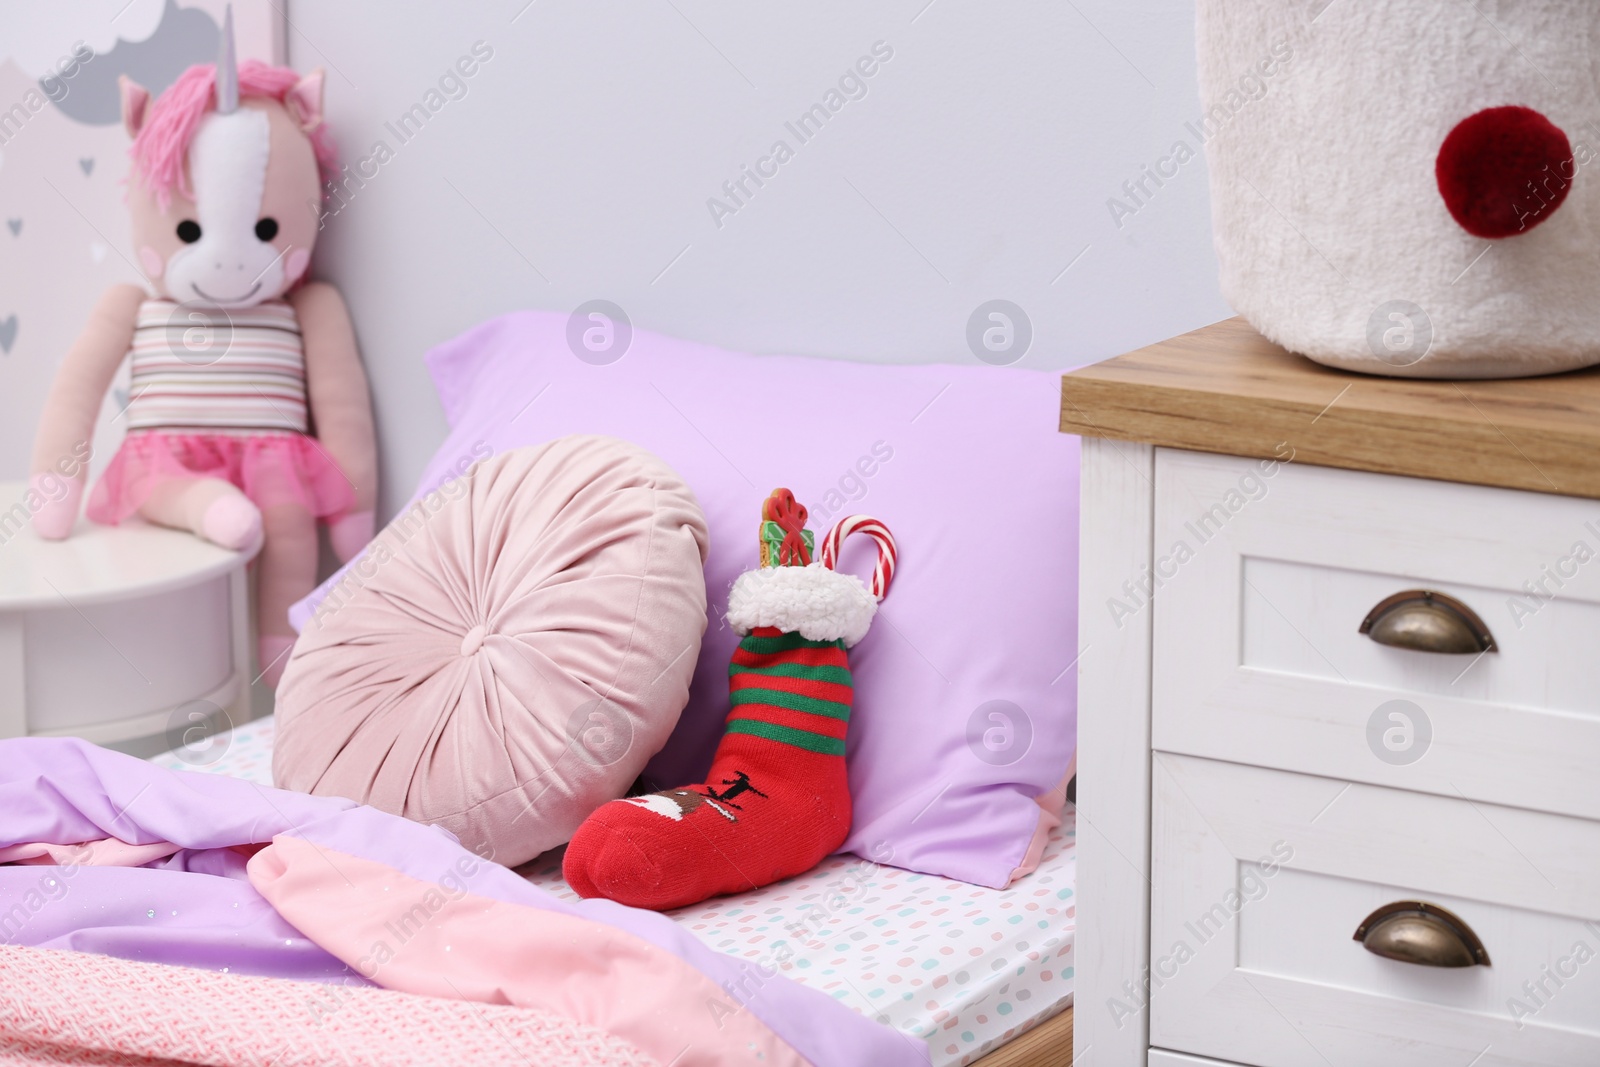 Photo of Stocking with presents on bed in children's room. Saint Nicholas Day tradition